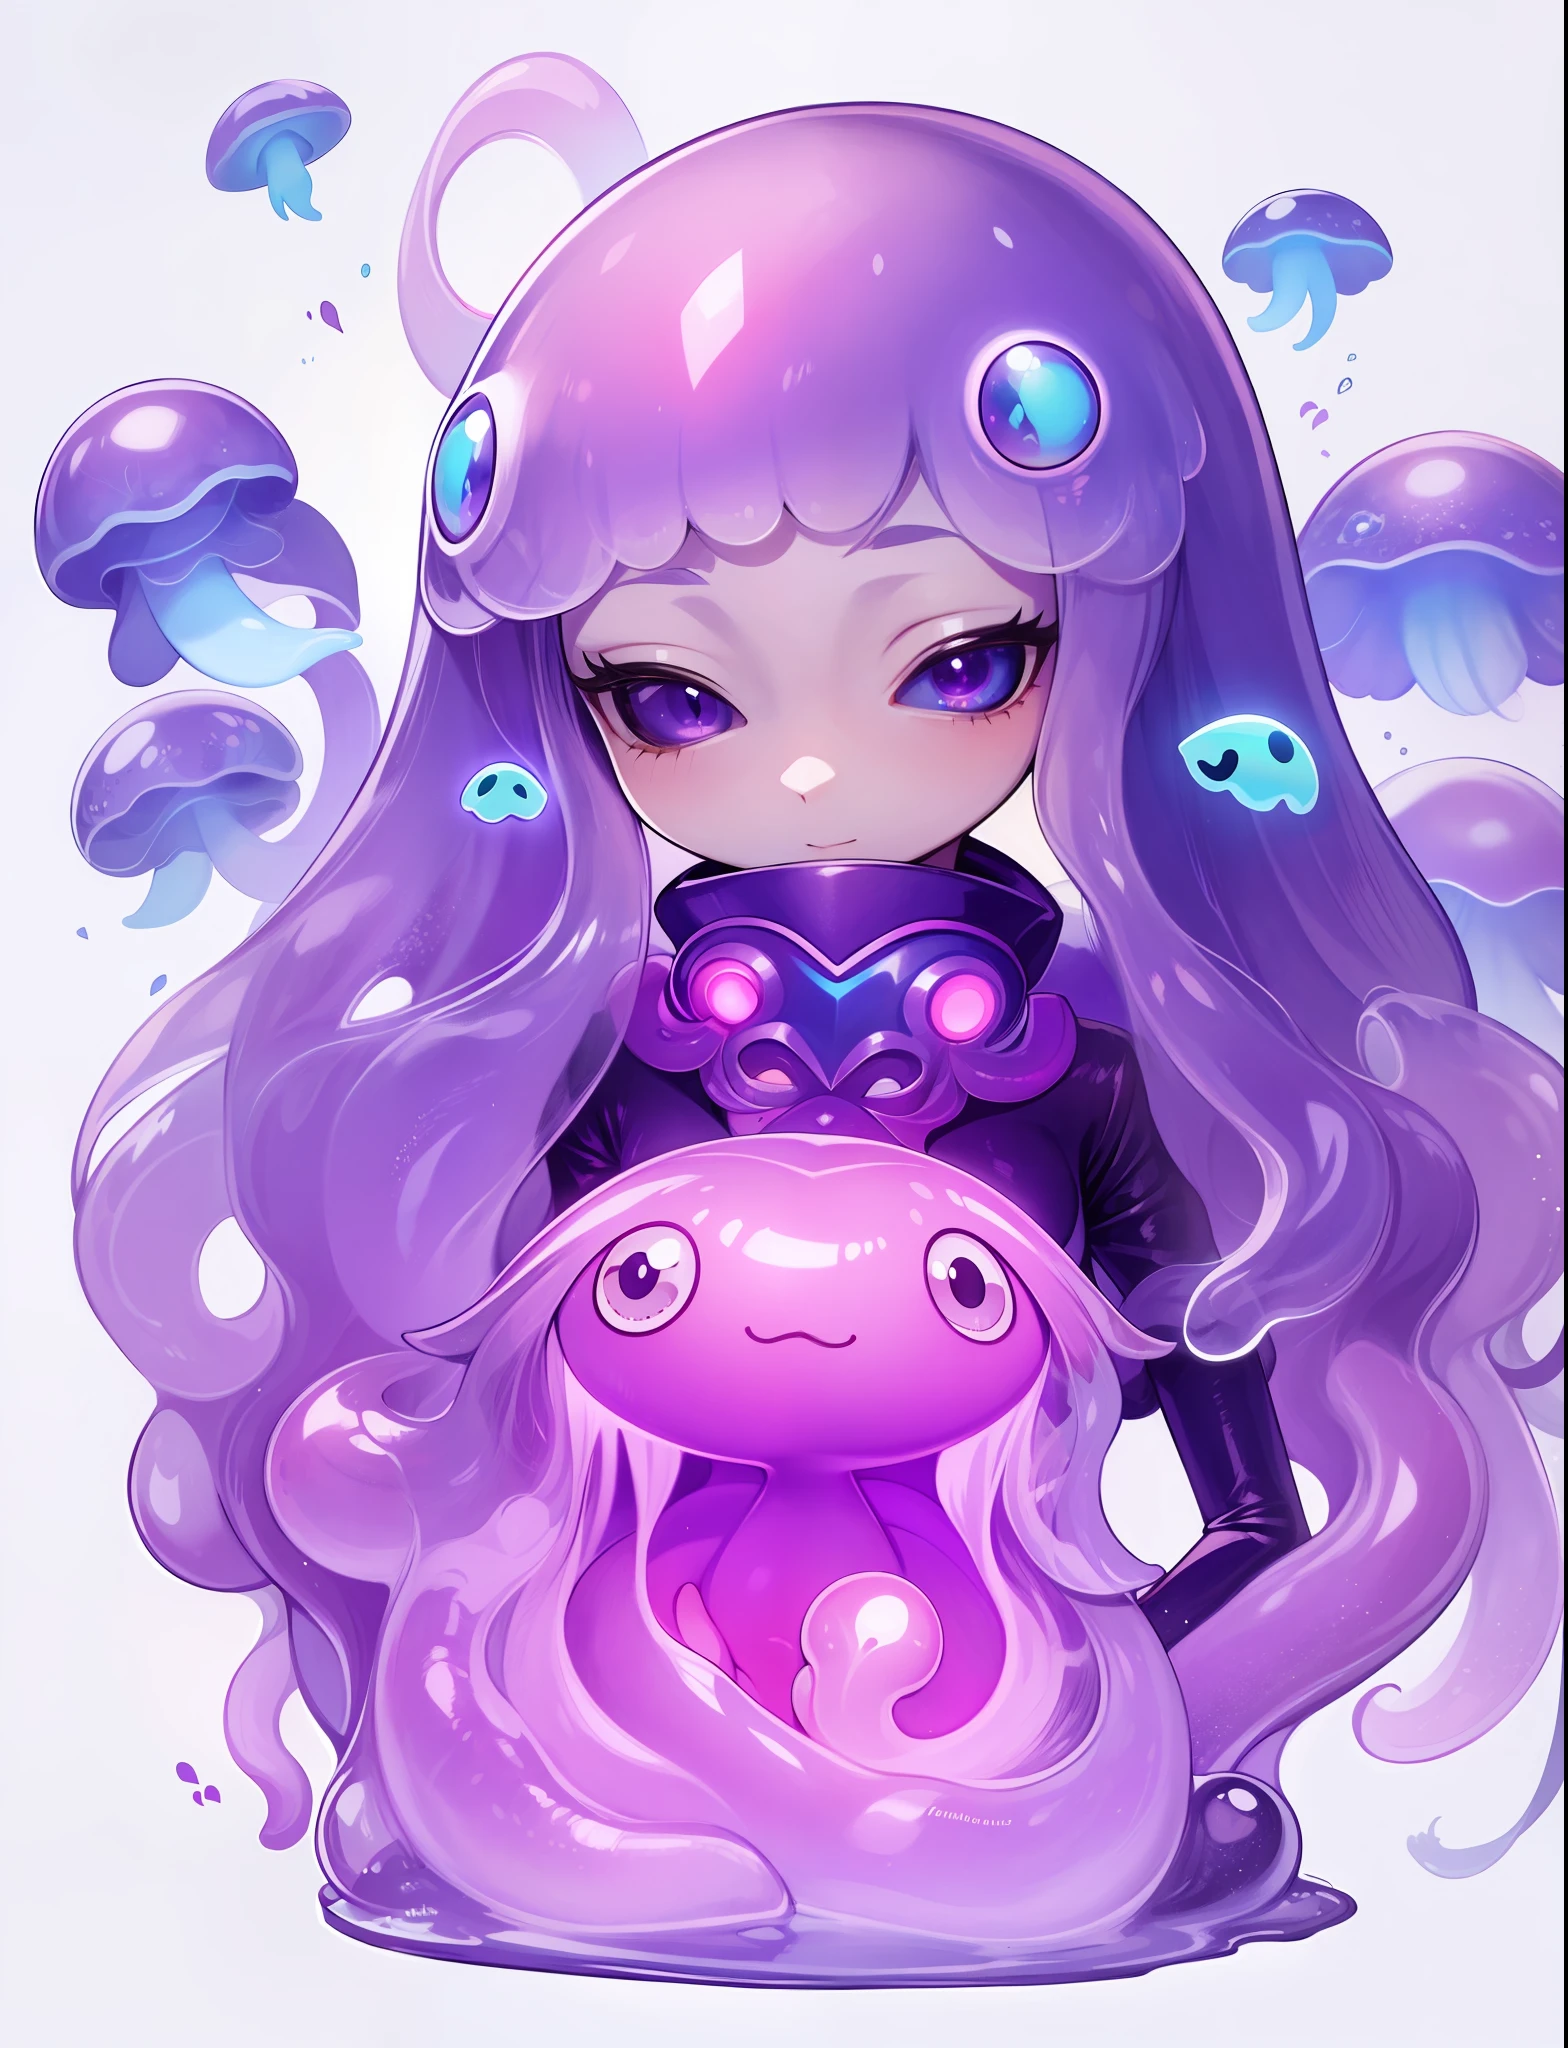 Clione and jellyfish are fused with a girl. slime body. The whole body is translucent like jelly. Body line like wearing a dress. overly long sleeves. Tentacles protrude from the sleeves. feminine mouth. Her face is covered in a heart-shaped slime mask that completely hides her eyes, but instead has glowing crystals. Her chest glows.